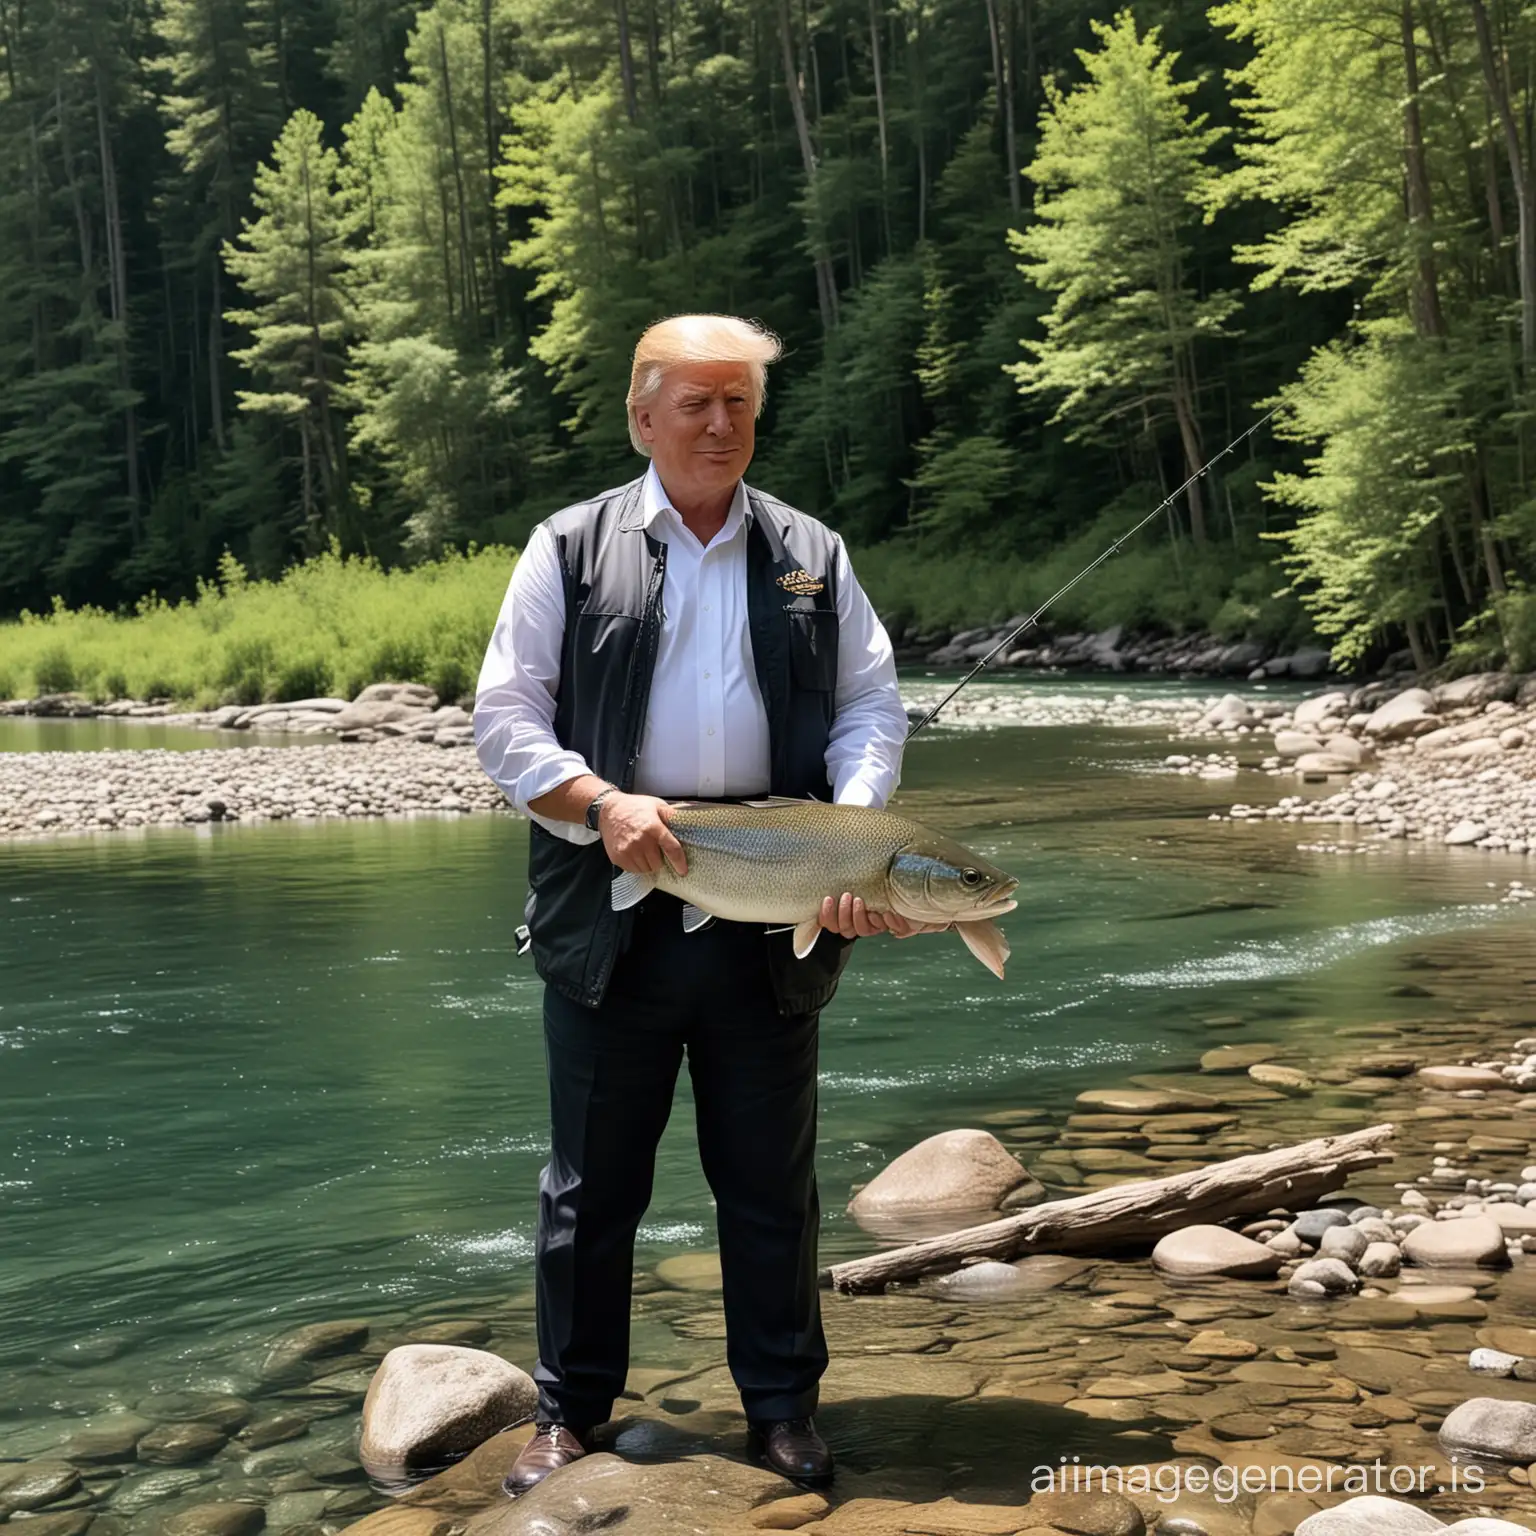 Former president Trump enjoying a serene day of fishing beside a crystal-clear river, surrounded by natural beauty,he had captured one large fish which is kept beside him, majestic scenery.